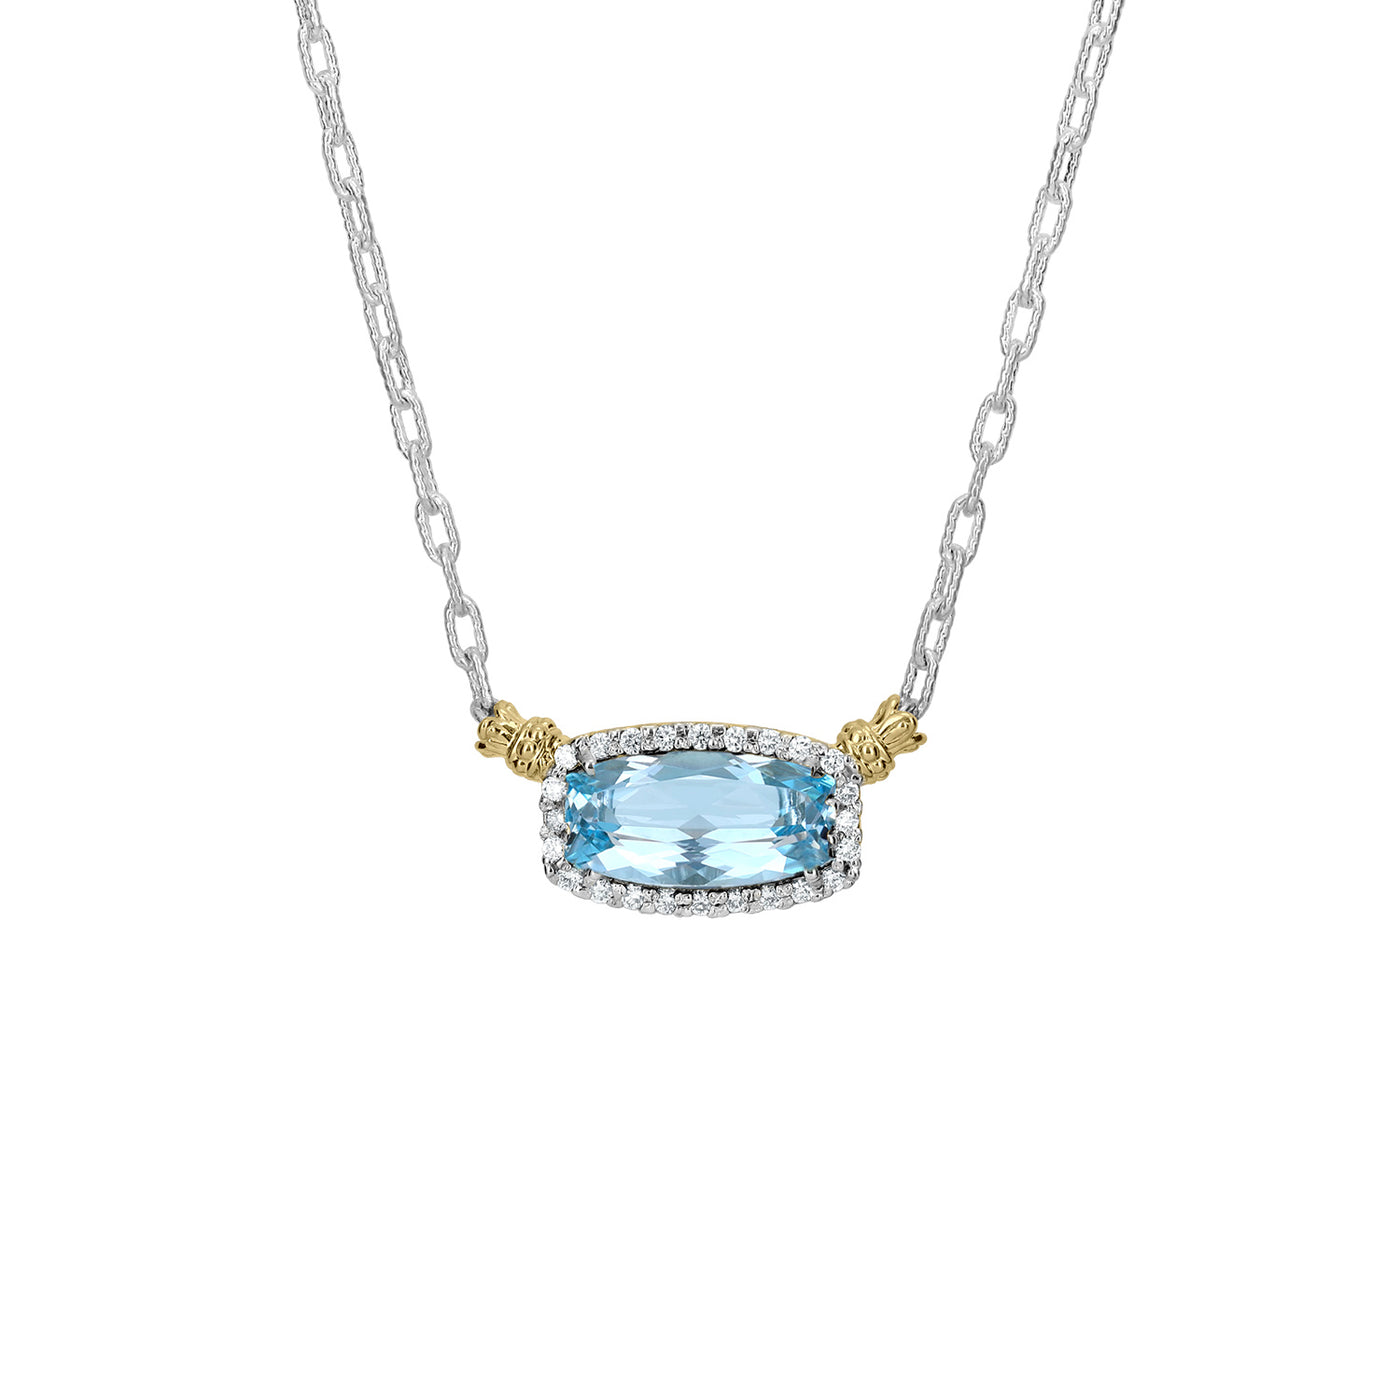 Vahan Sterling Silver and 14k Yellow Gold Blue Topaz and Diamond Halo Necklace – 80548DSBT/18